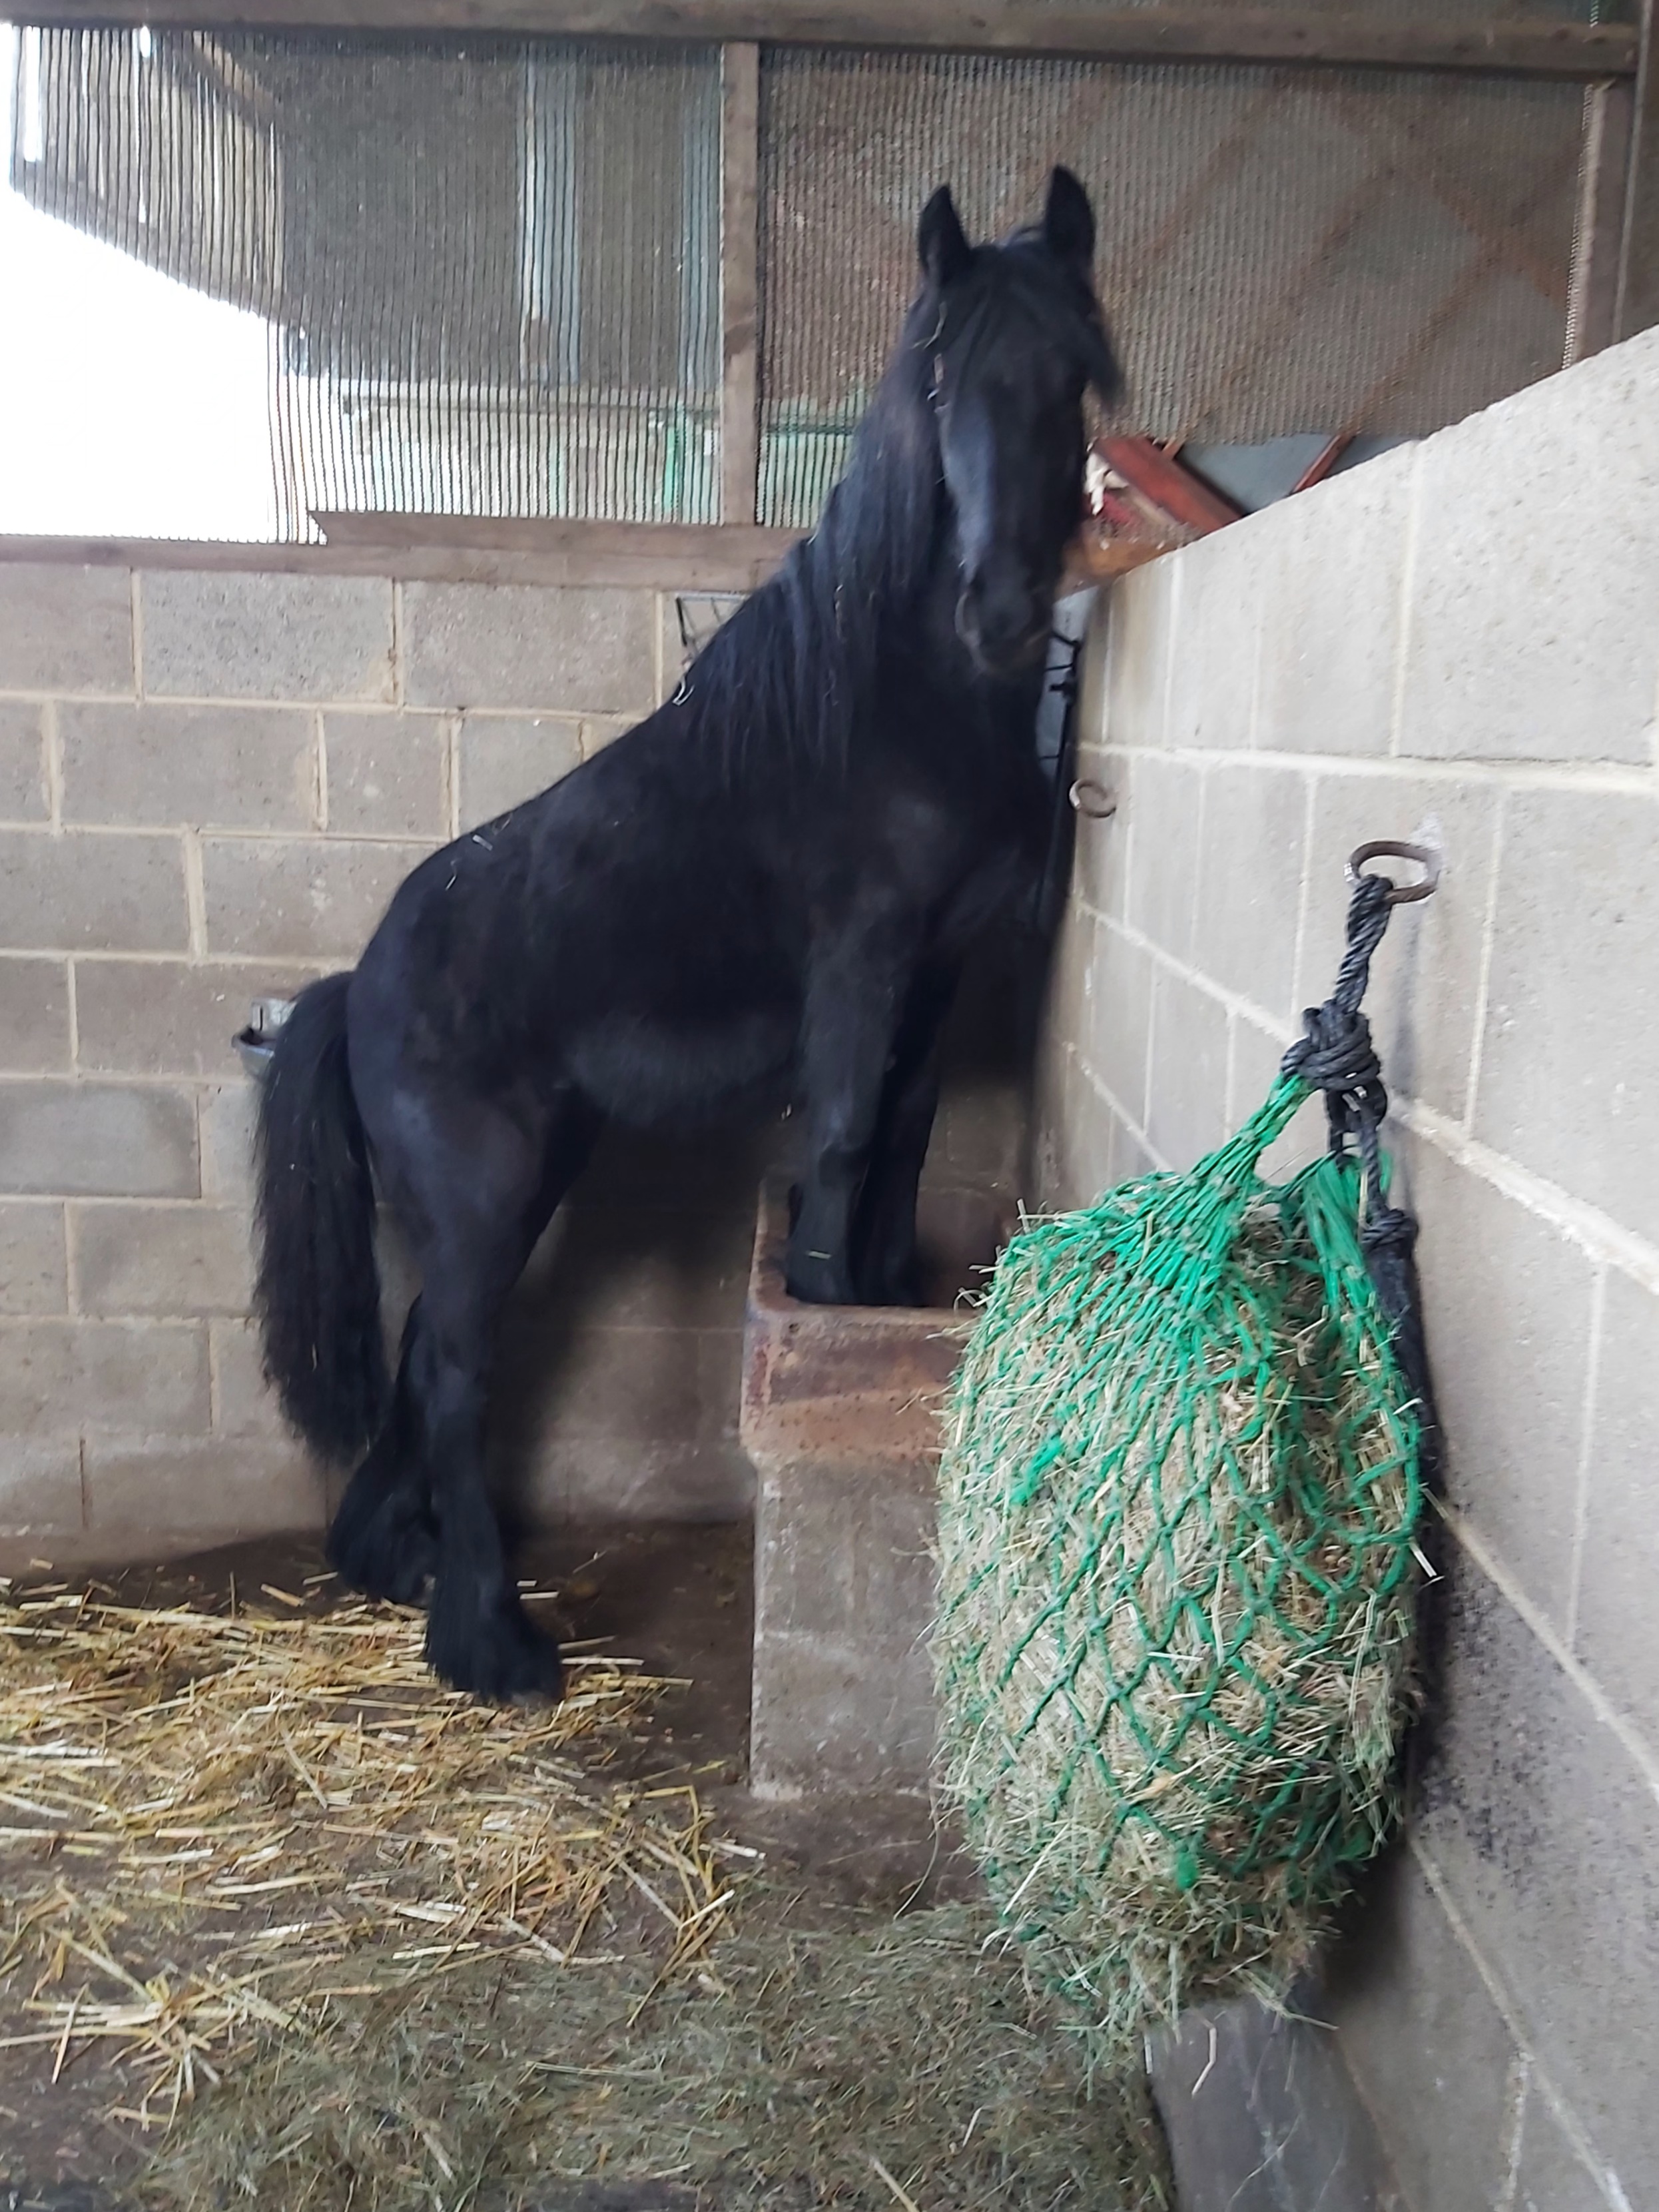 black pony using a step to see over a block wall